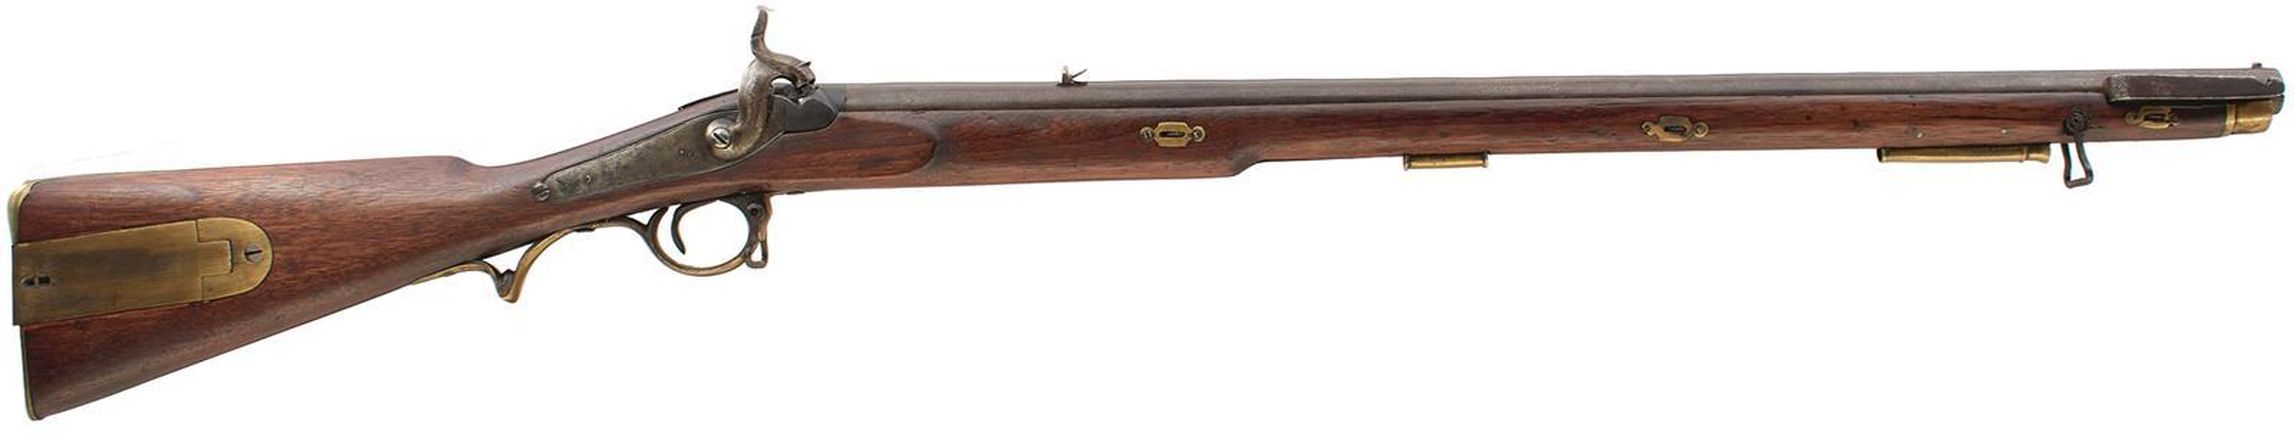 A .700 CALIBRE PERCUSSION INDIAN ARSENAL BRUNSWICK RIFLE, 30.25inch sighted barrel fitted with